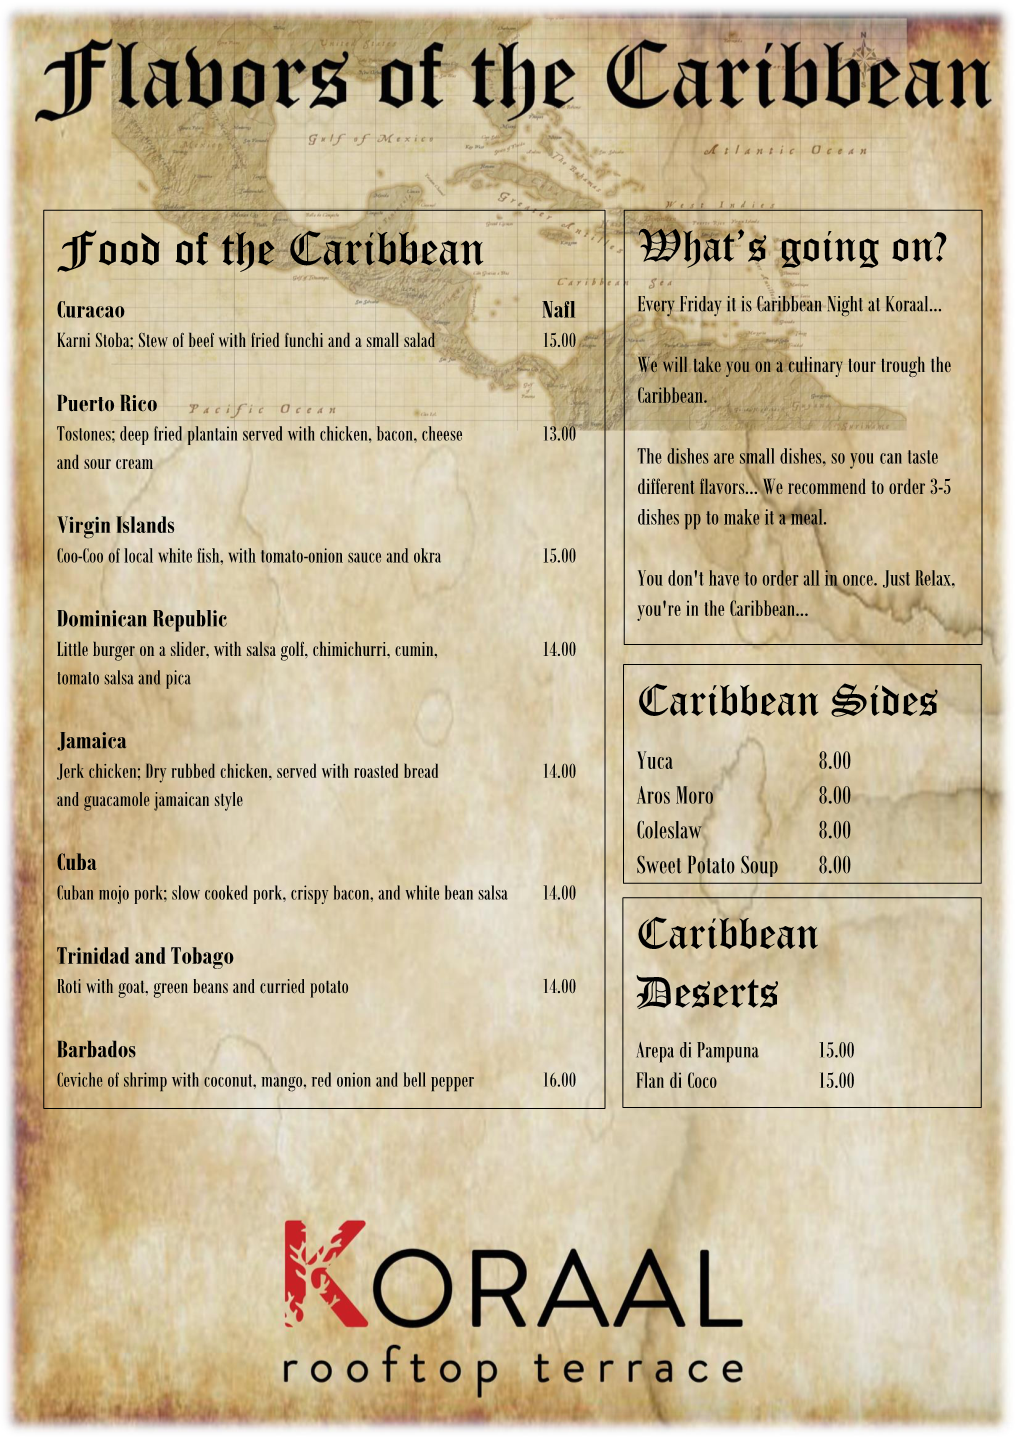 Food of the Caribbean